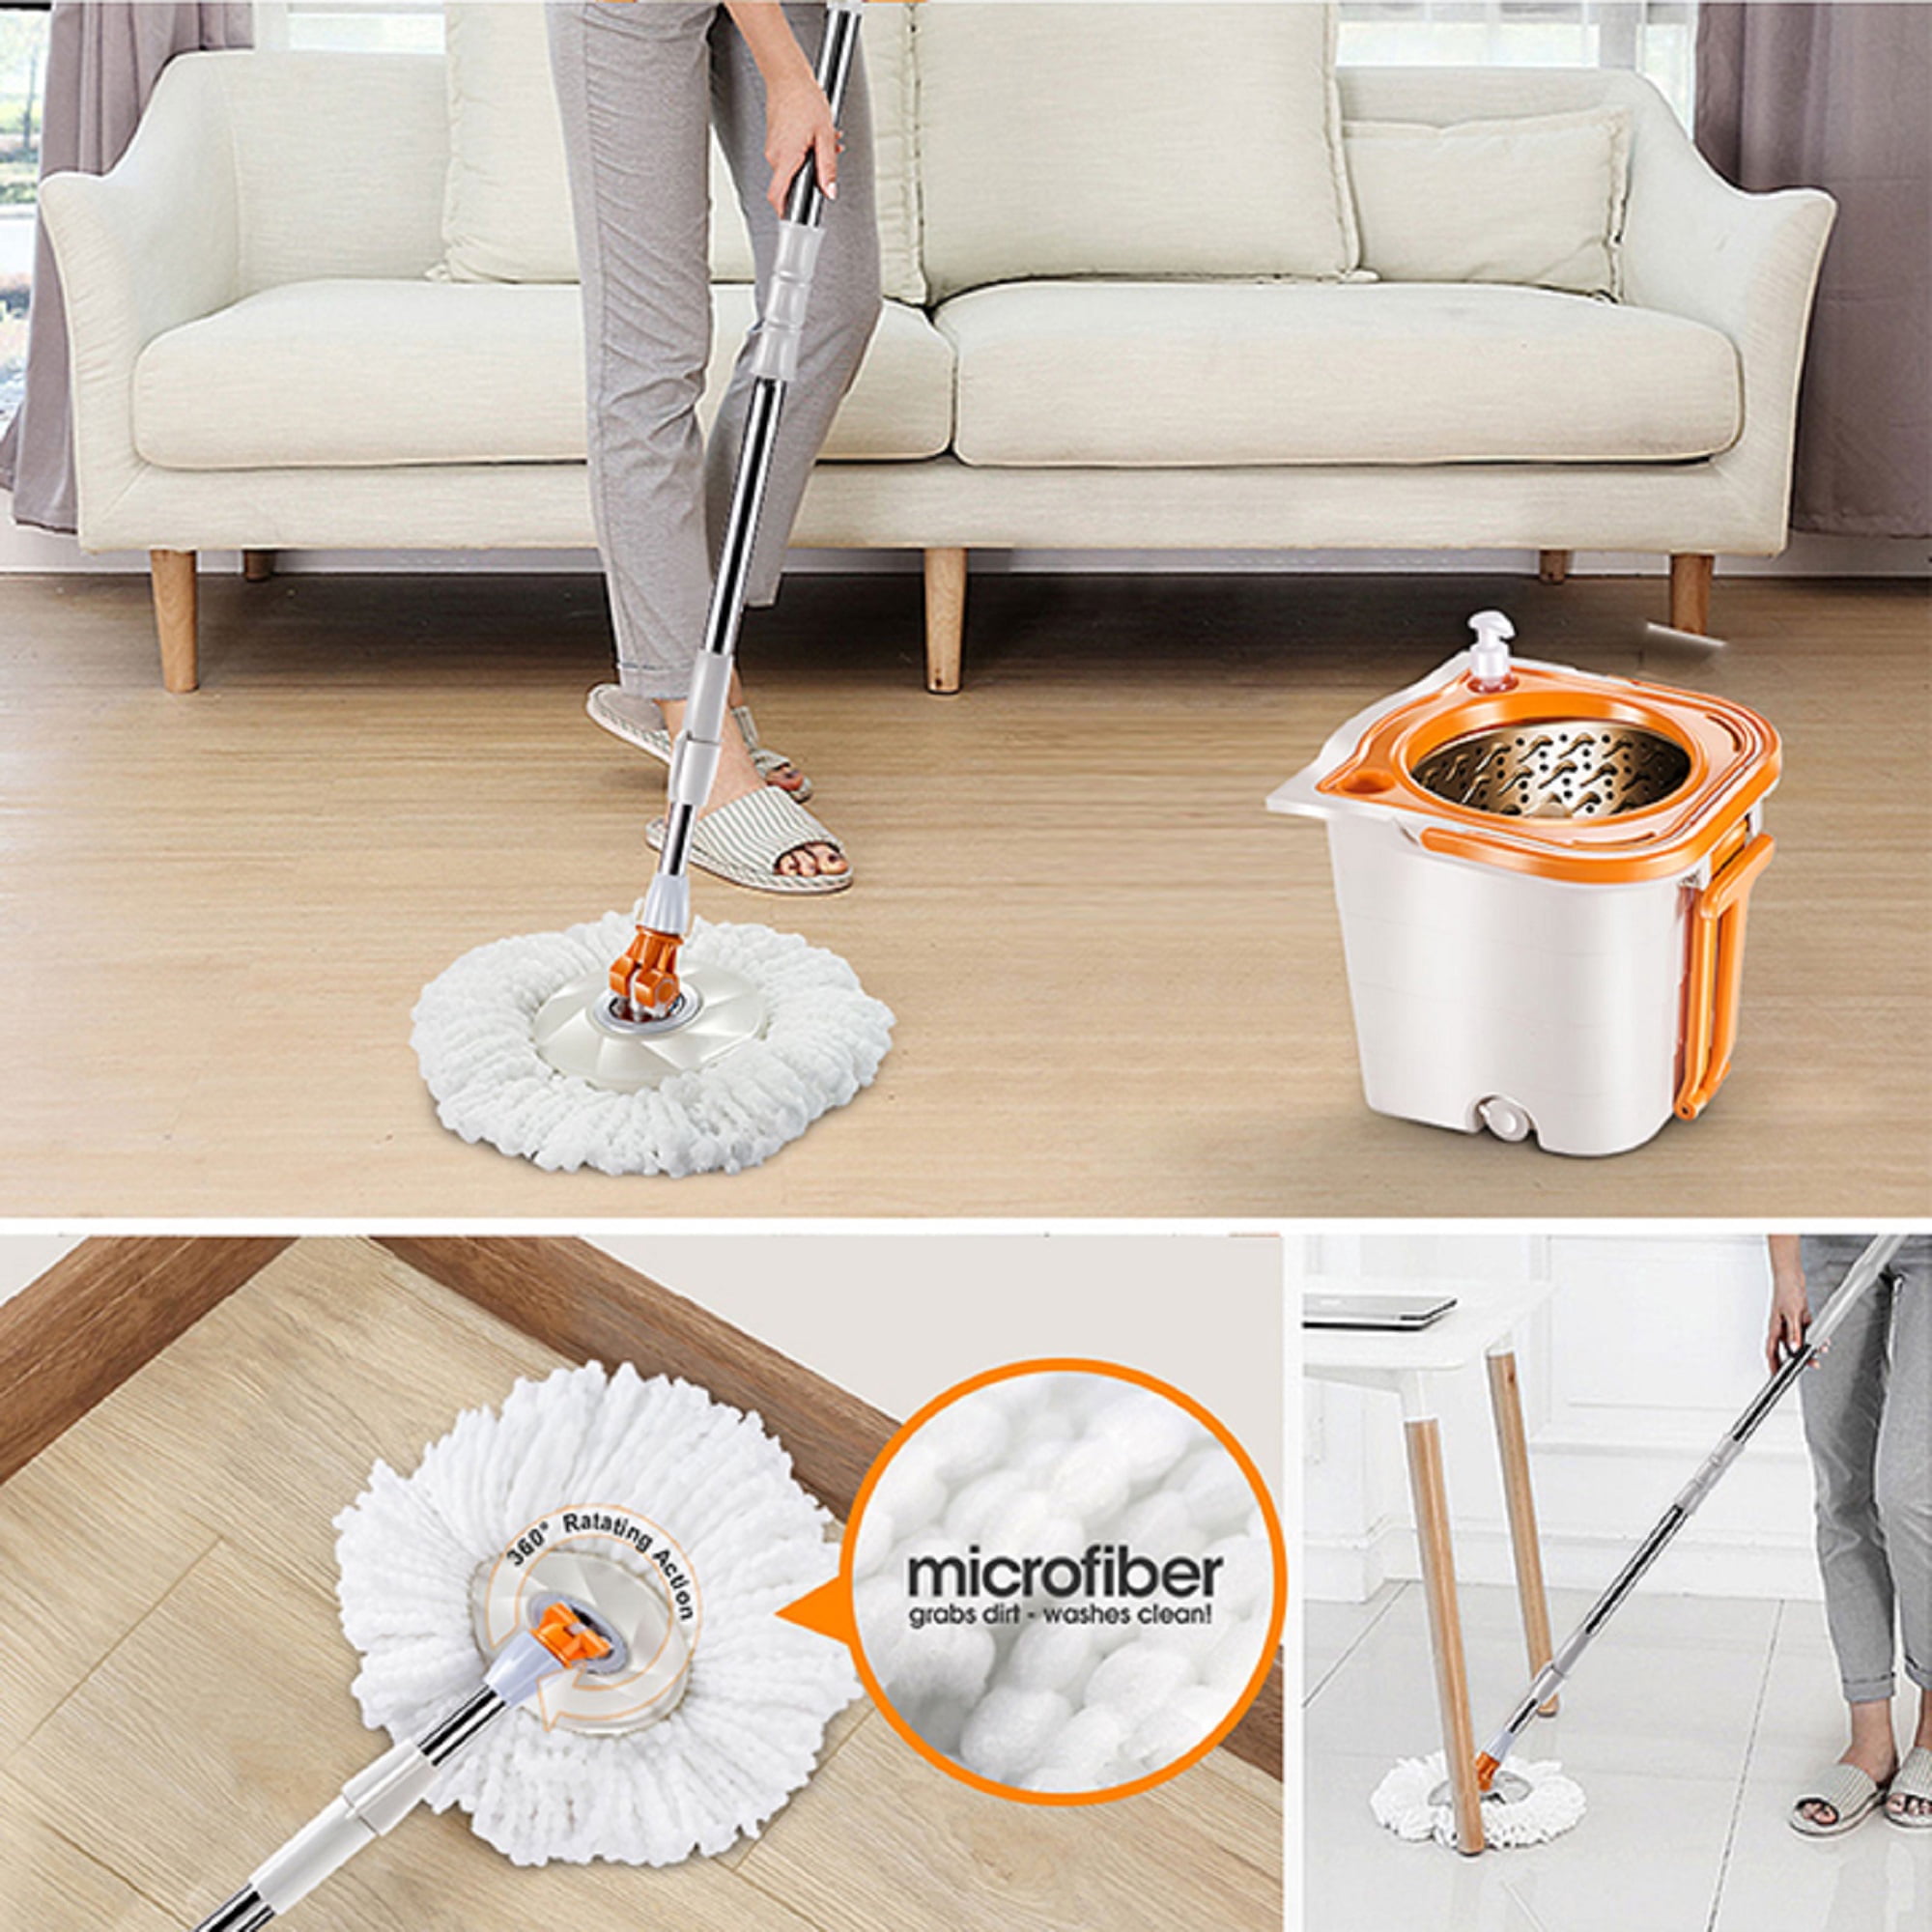  MASTERTOP Spin Mop & Bucket with Wringer Set, Floor Cleaning,  Household Cleaning Supplies, Stainless Steel Spinning Mop Bucket, 7  Microfiber Mop Refills, 57 Extended Handle, 2 Wheels Easy Moving : Health